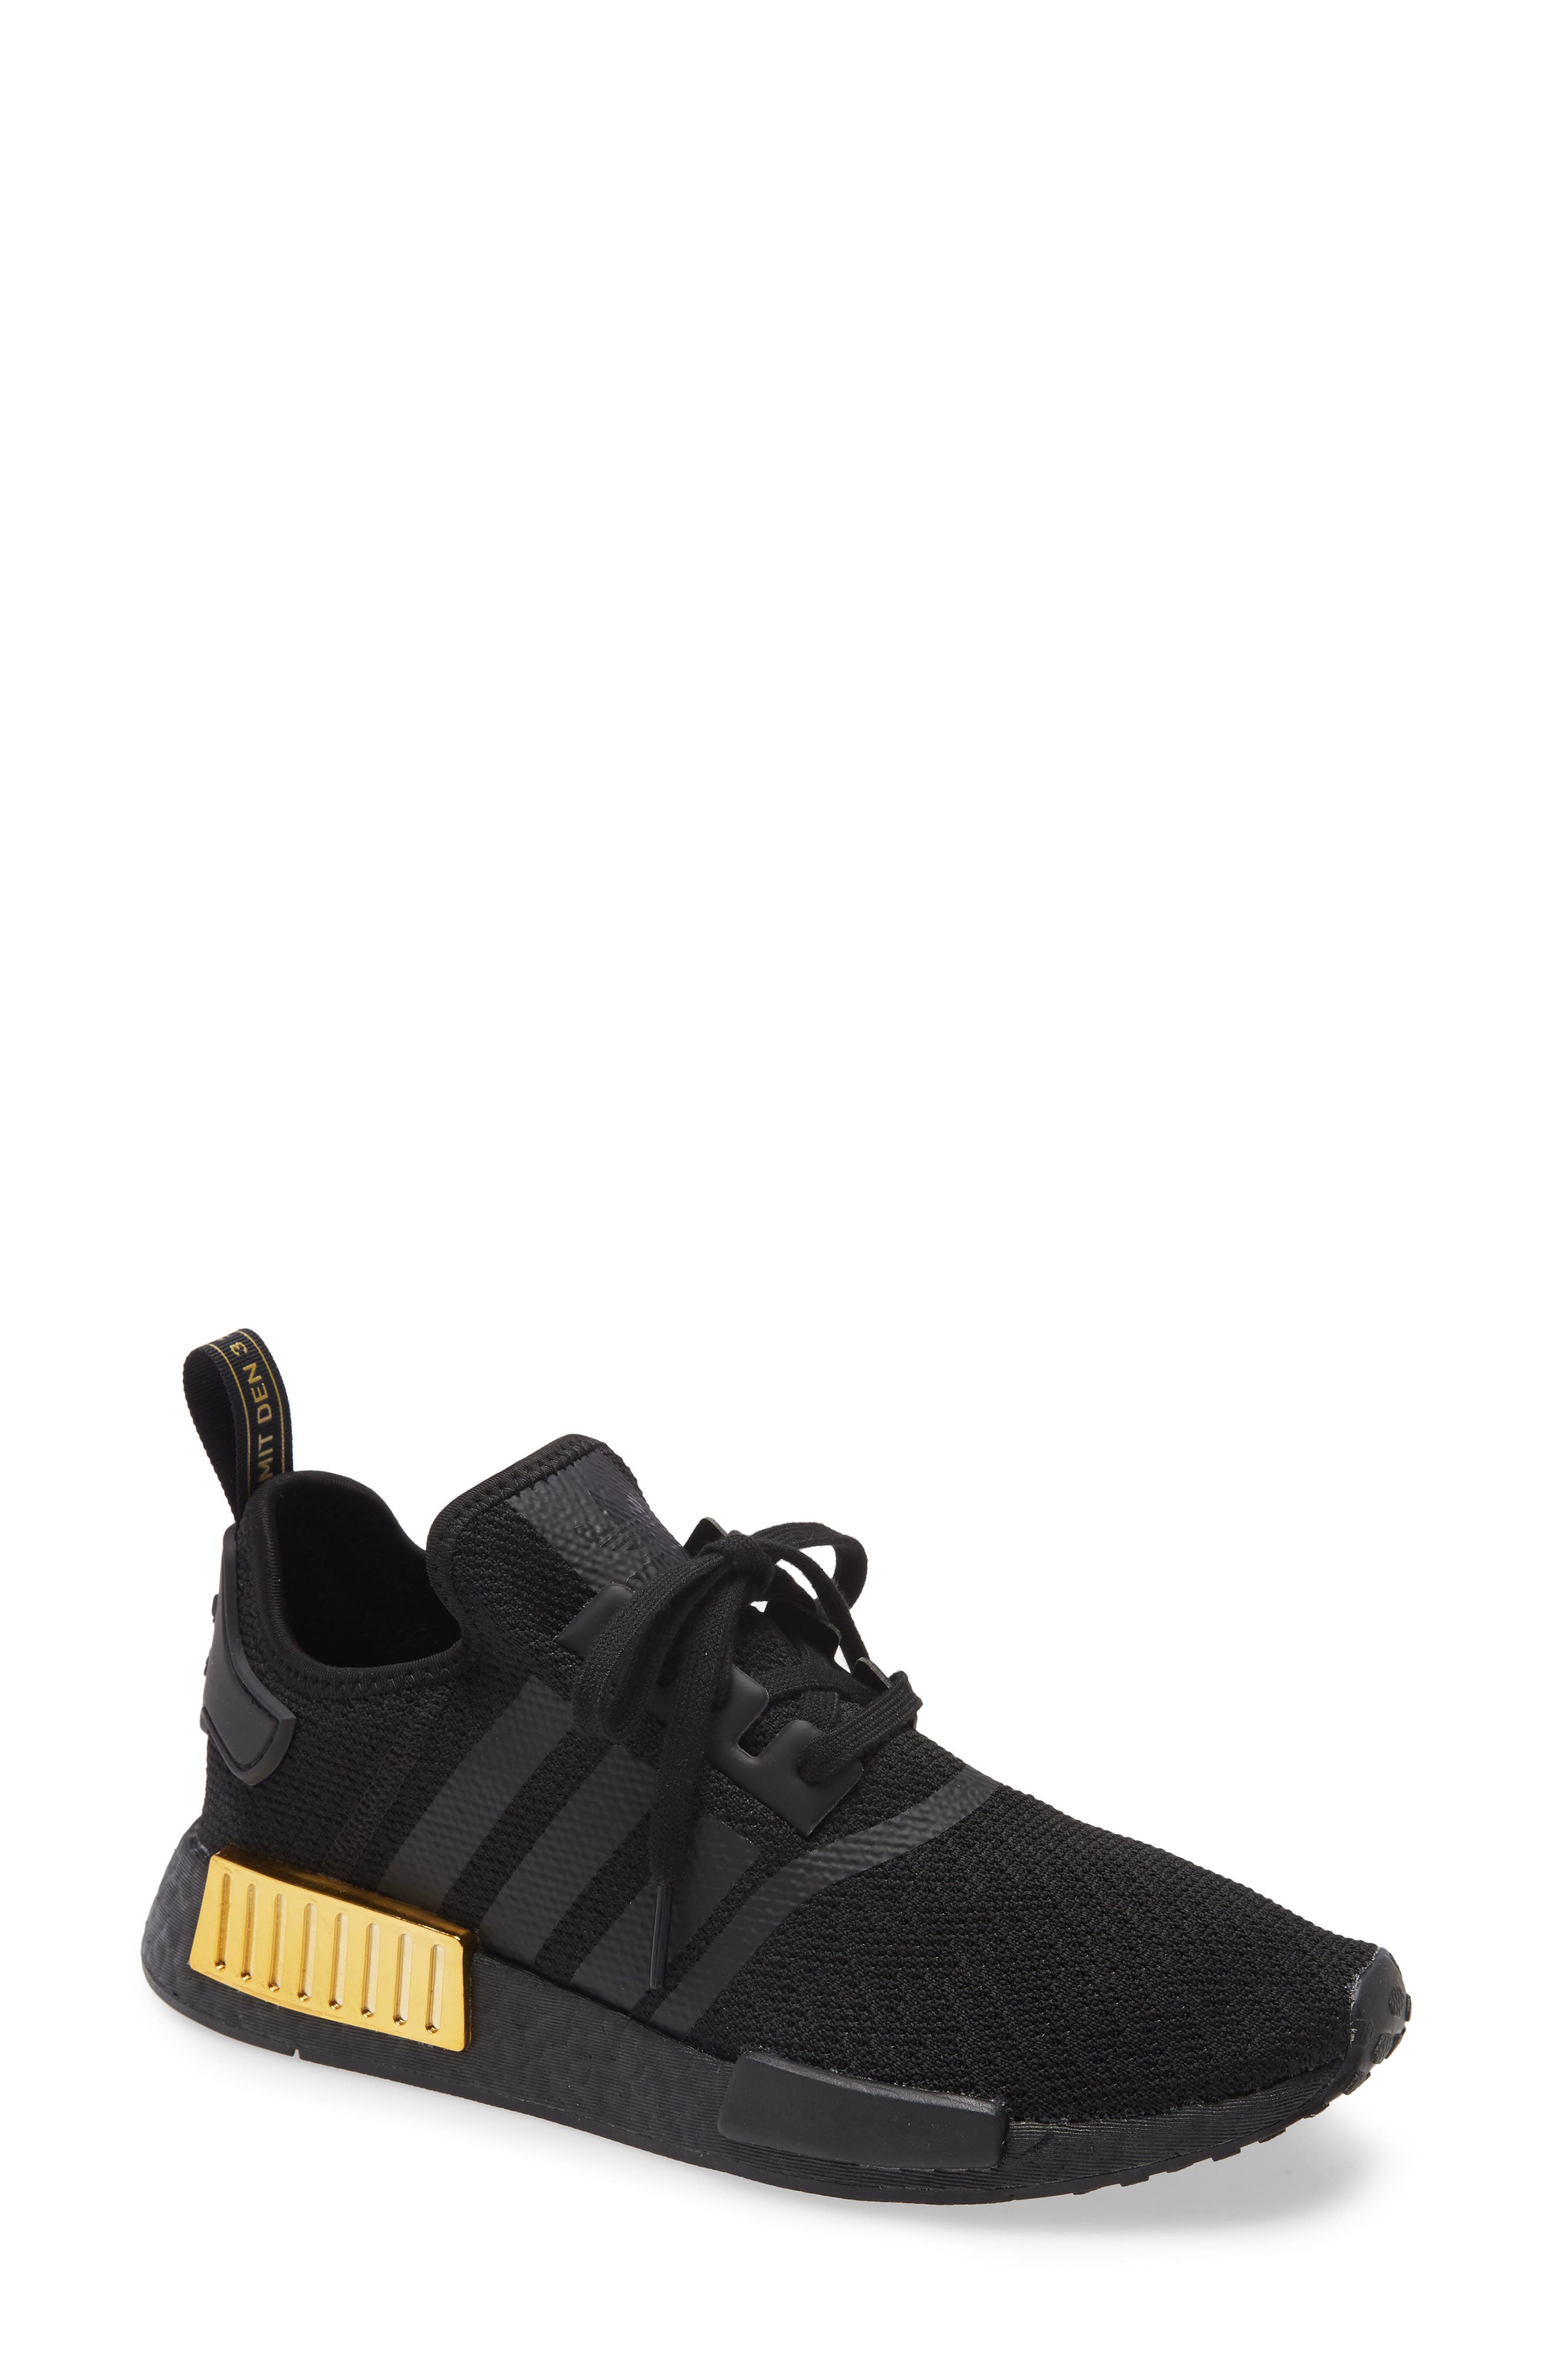 adidas with strap womens